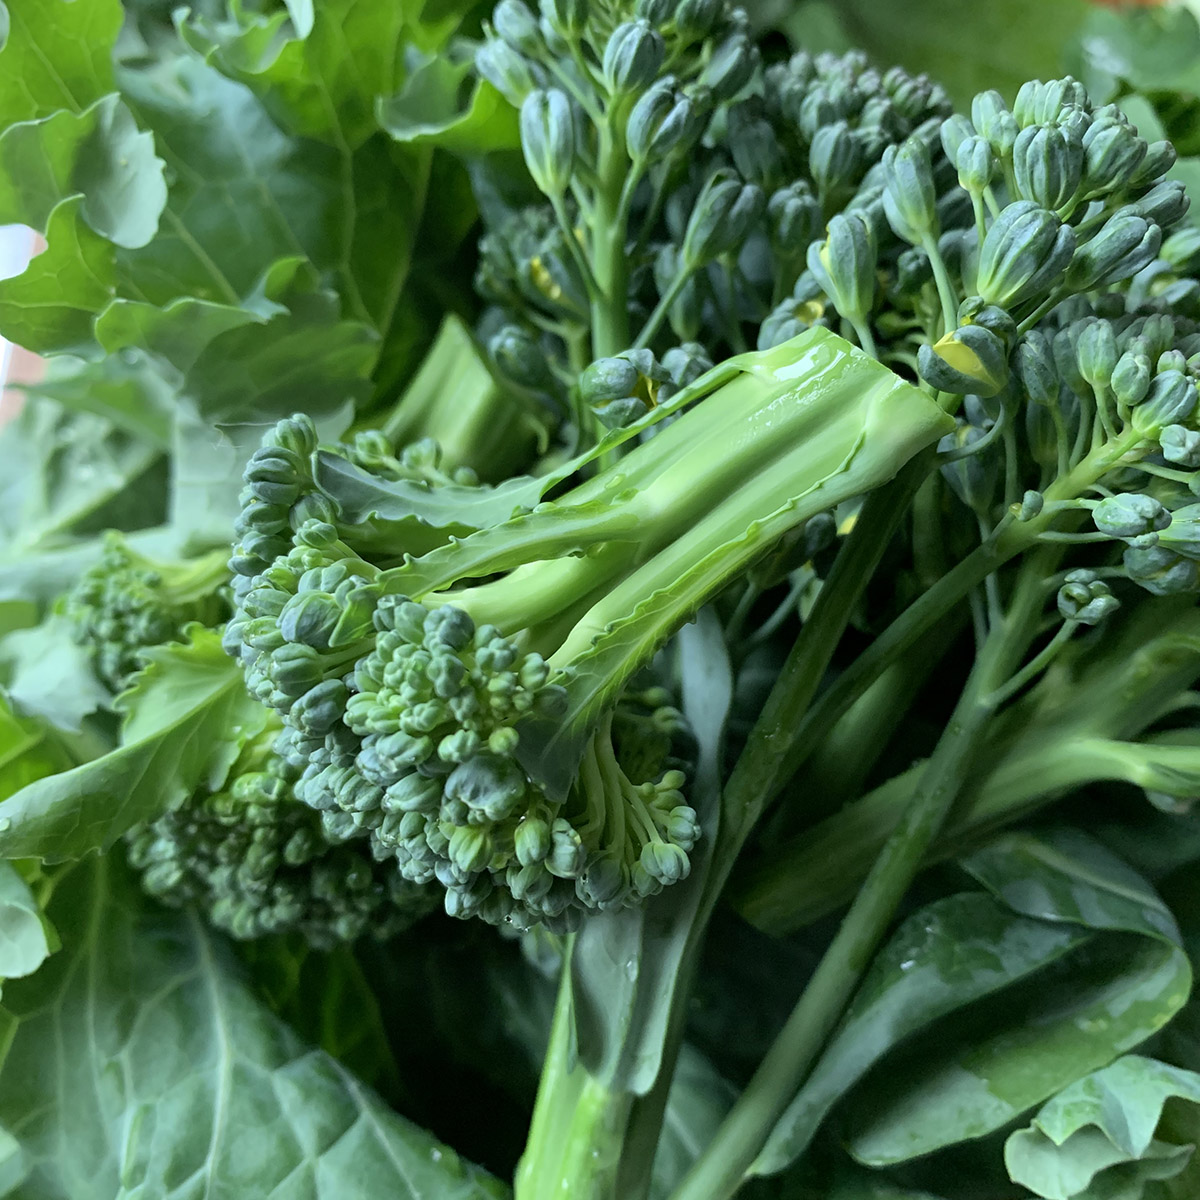 Broccoli is rich in SFN, protects against coronaviruses